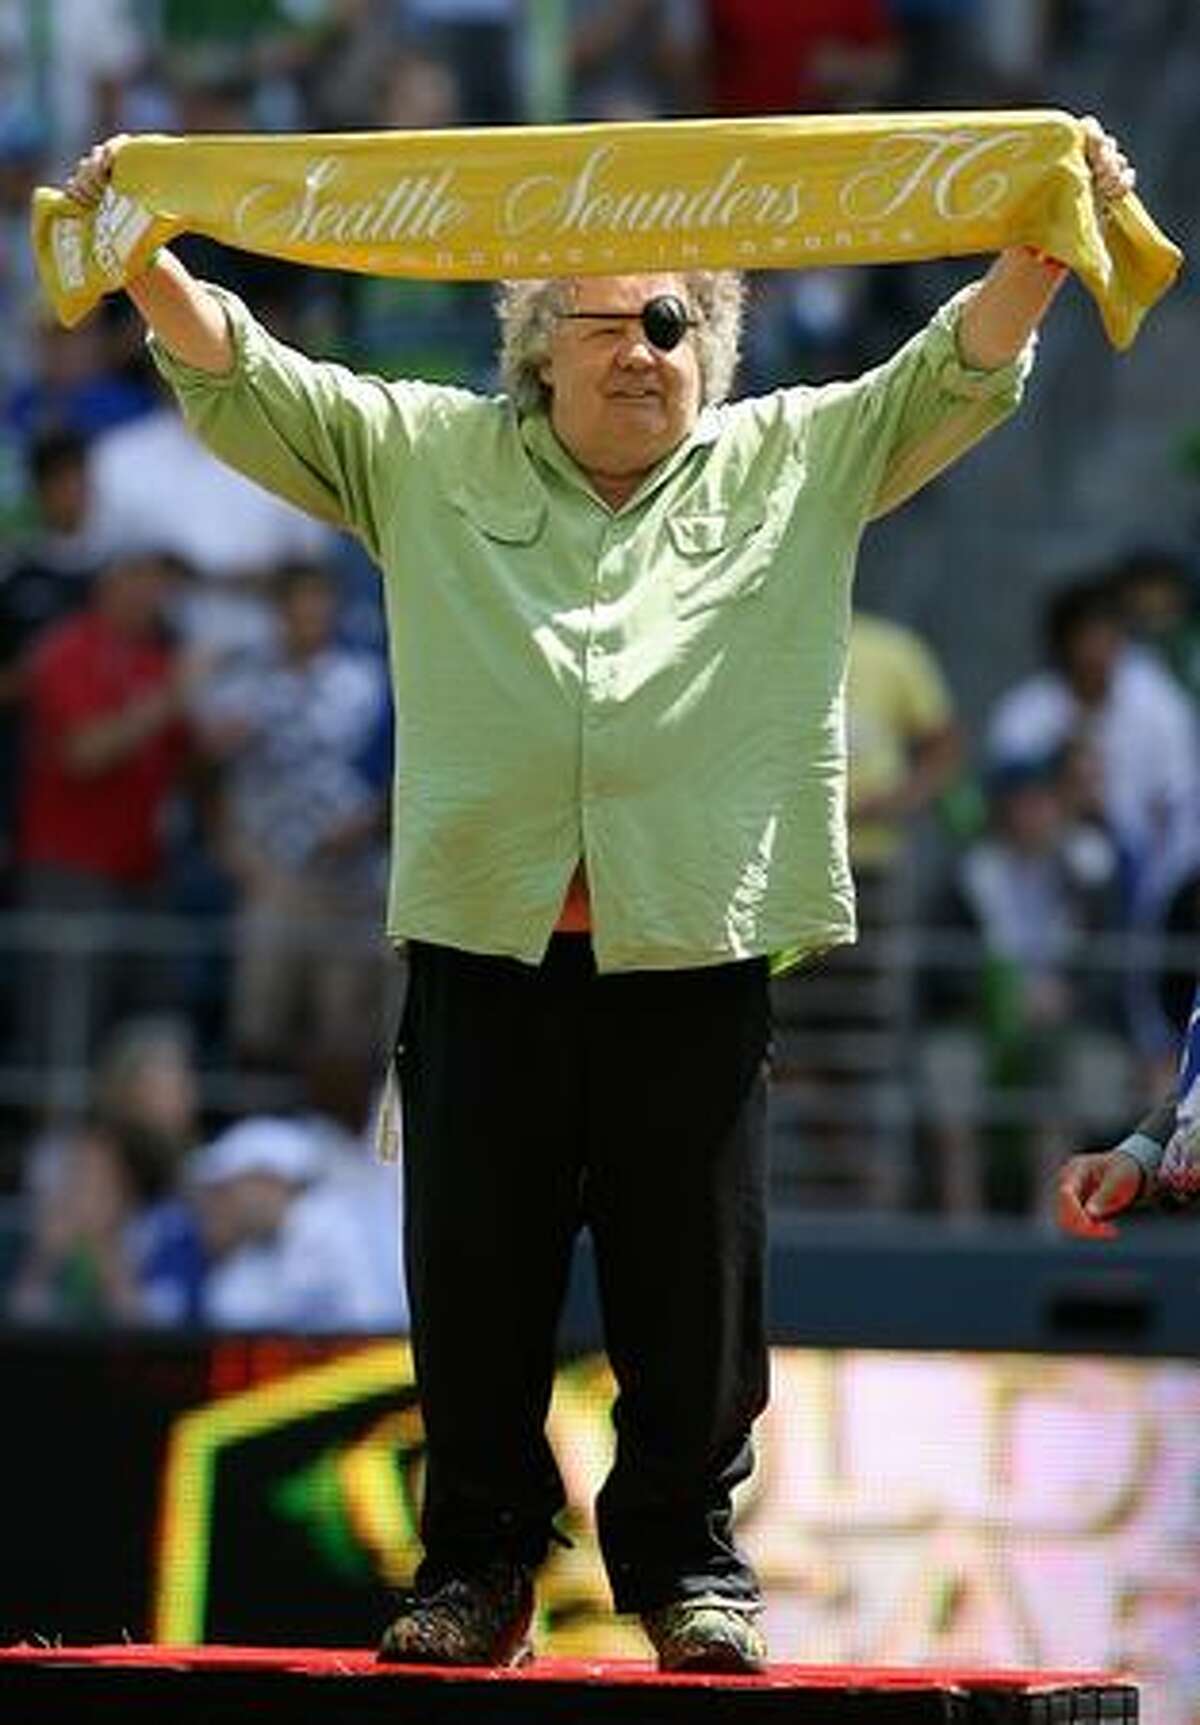 Seattle glass artist Dale Chihuly, pictured receiving a scarf prior to the friendly match between Chelsea FC and Seattle Sounders FC on July 18, 2009.